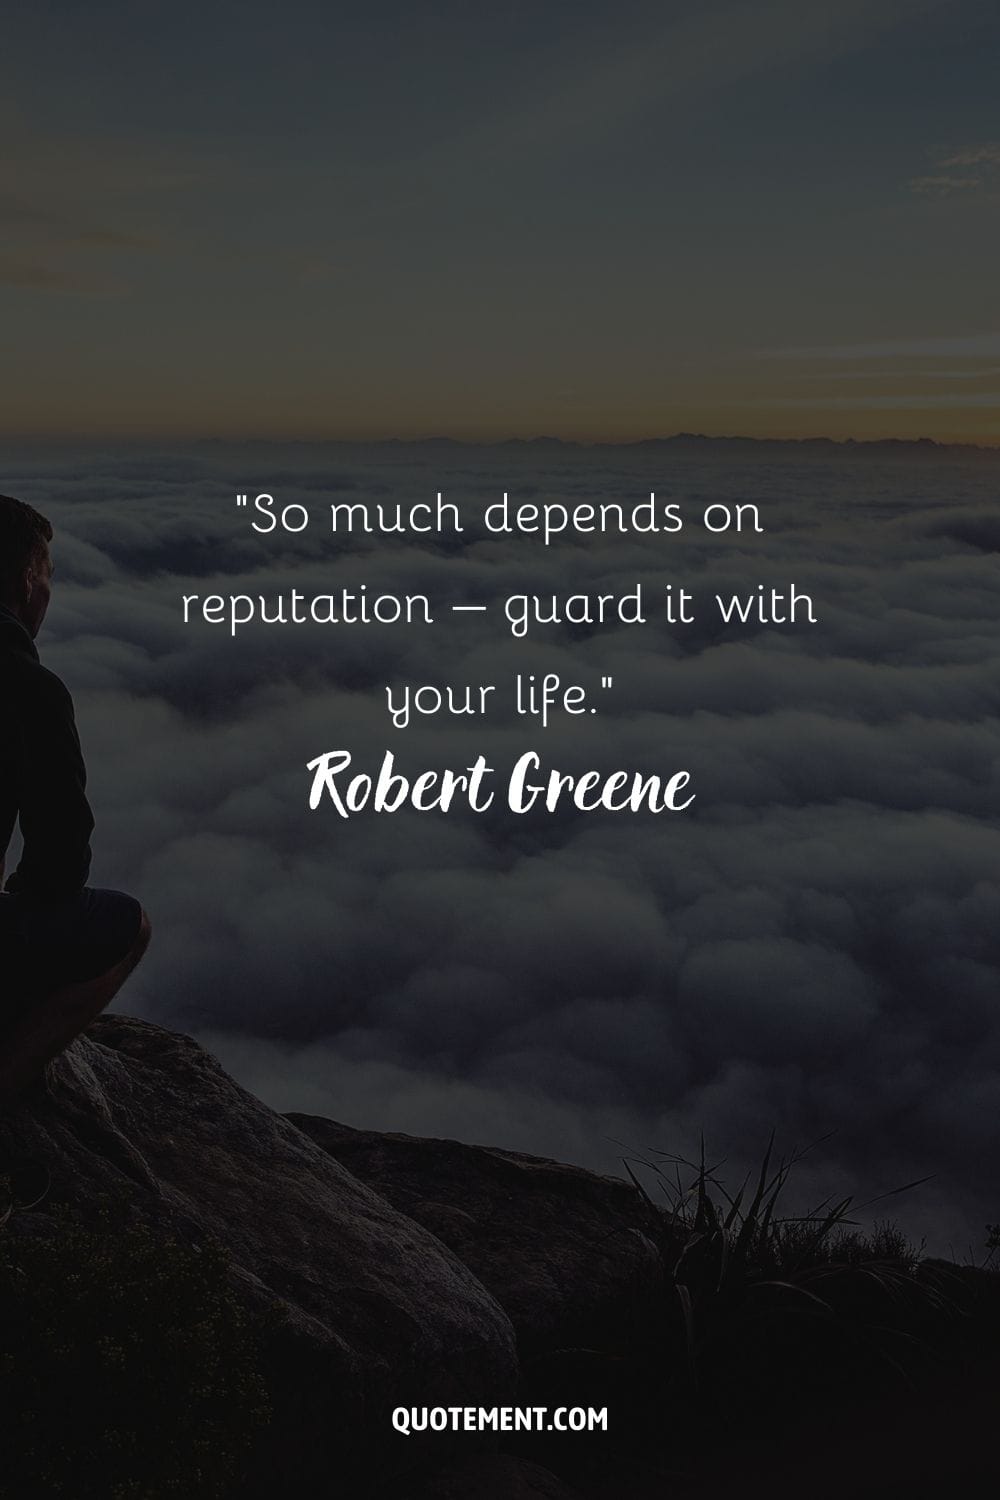 “So much depends on reputation – guard it with your life.” ― Robert Greene, The 48 Laws of Power